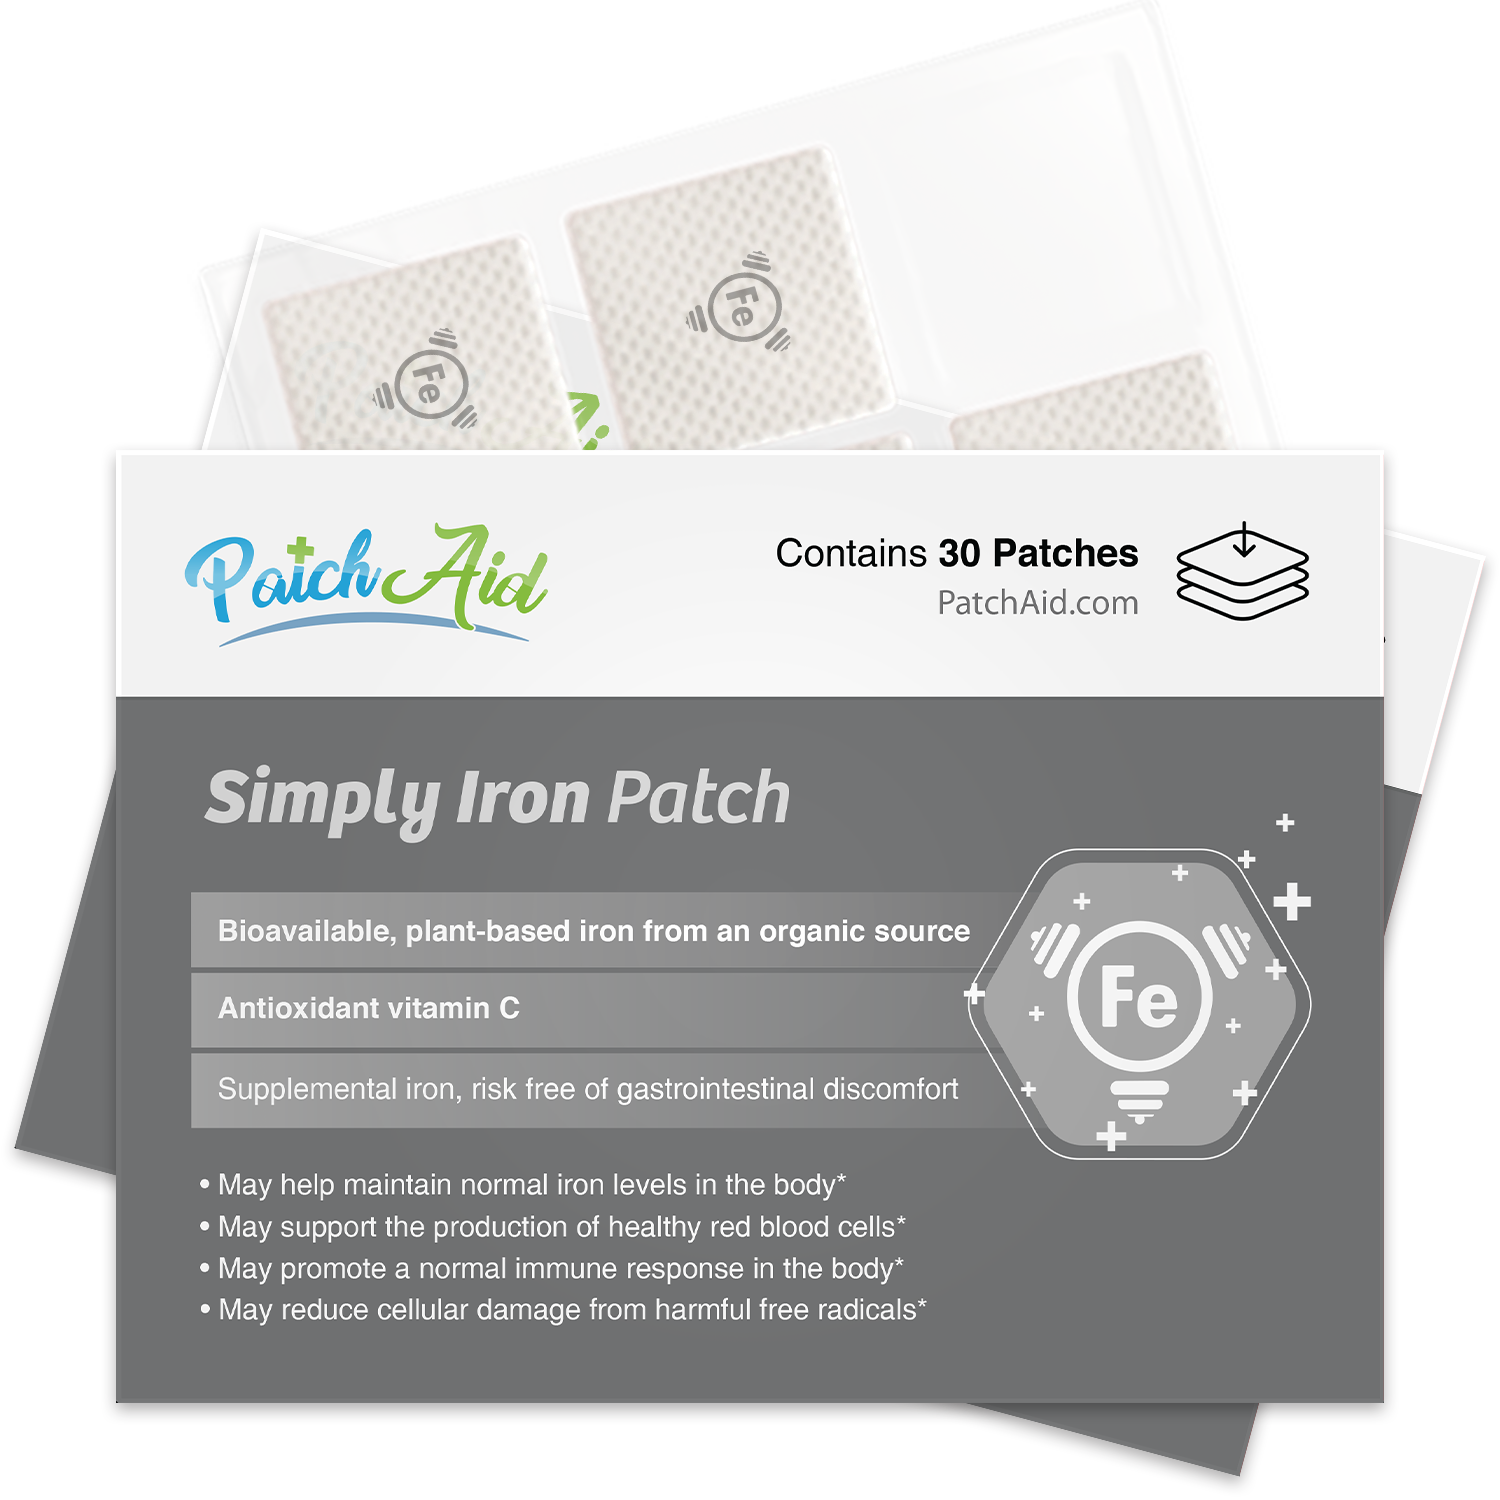 Simply Iron Patch by PatchAid